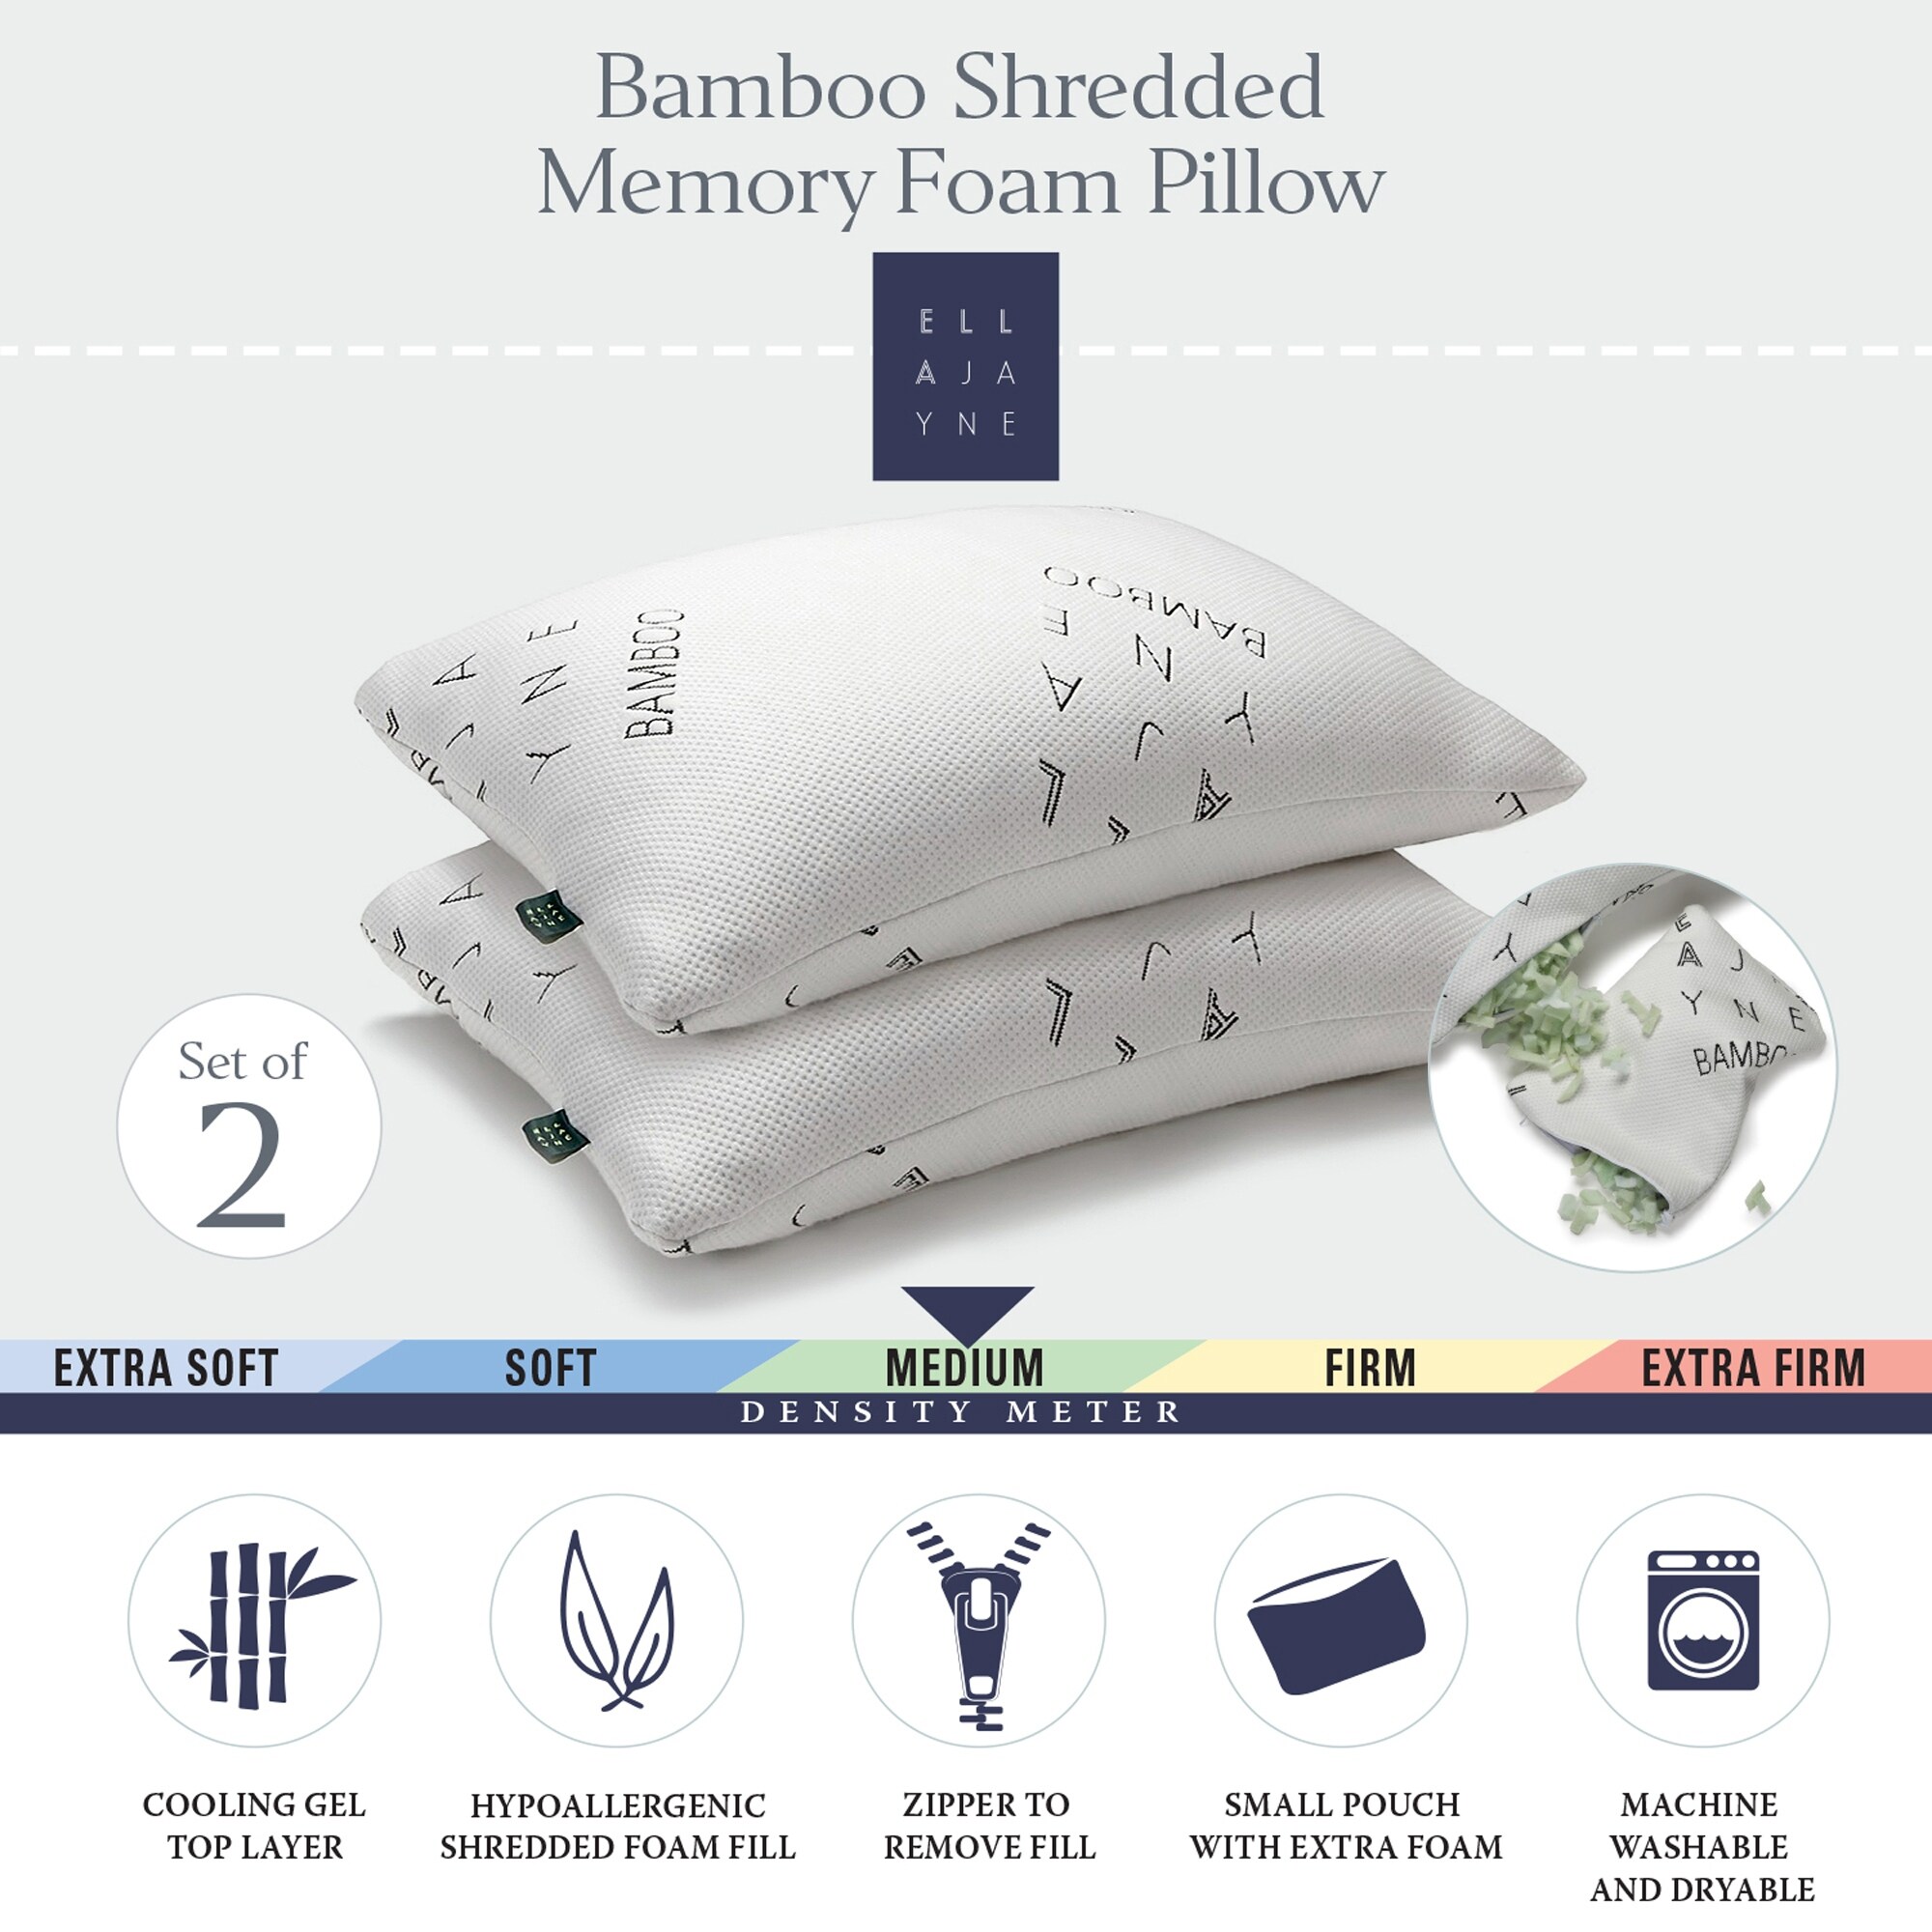 Wife Pillow - Topper, Bamboo Shell/ Charcoal Shredded High-Density Memory Foam Filling. Adjustable for Side Sleepers Zipper Add /Remove Fill